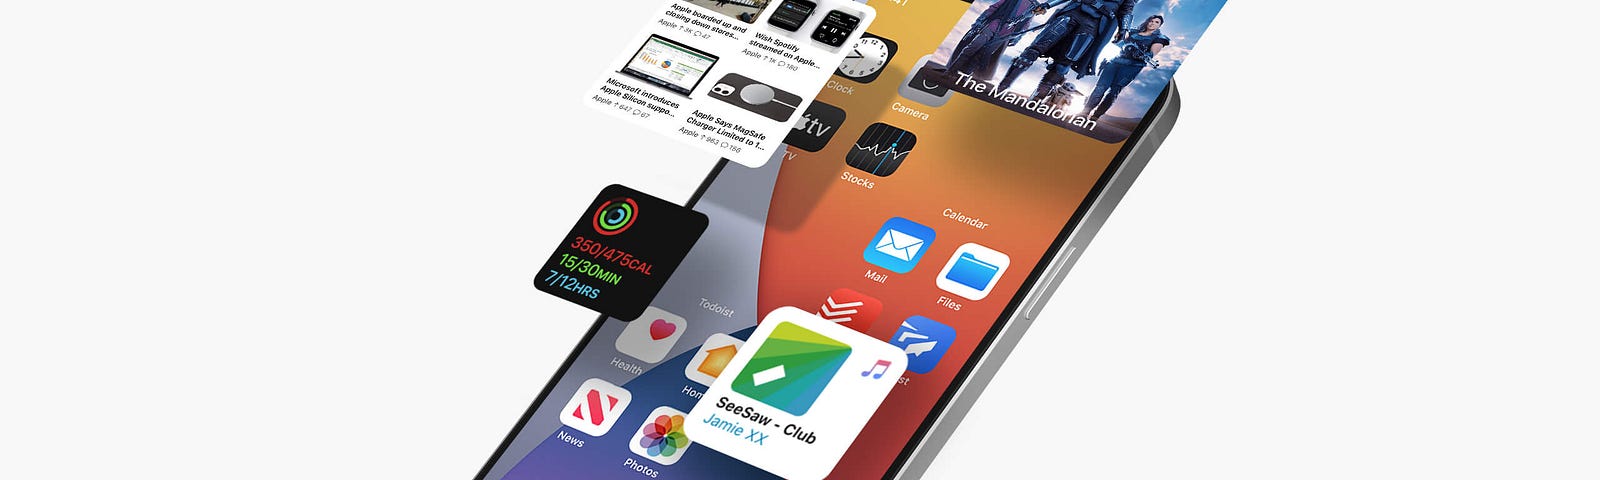 iOS Home Screen Widgets are exploding